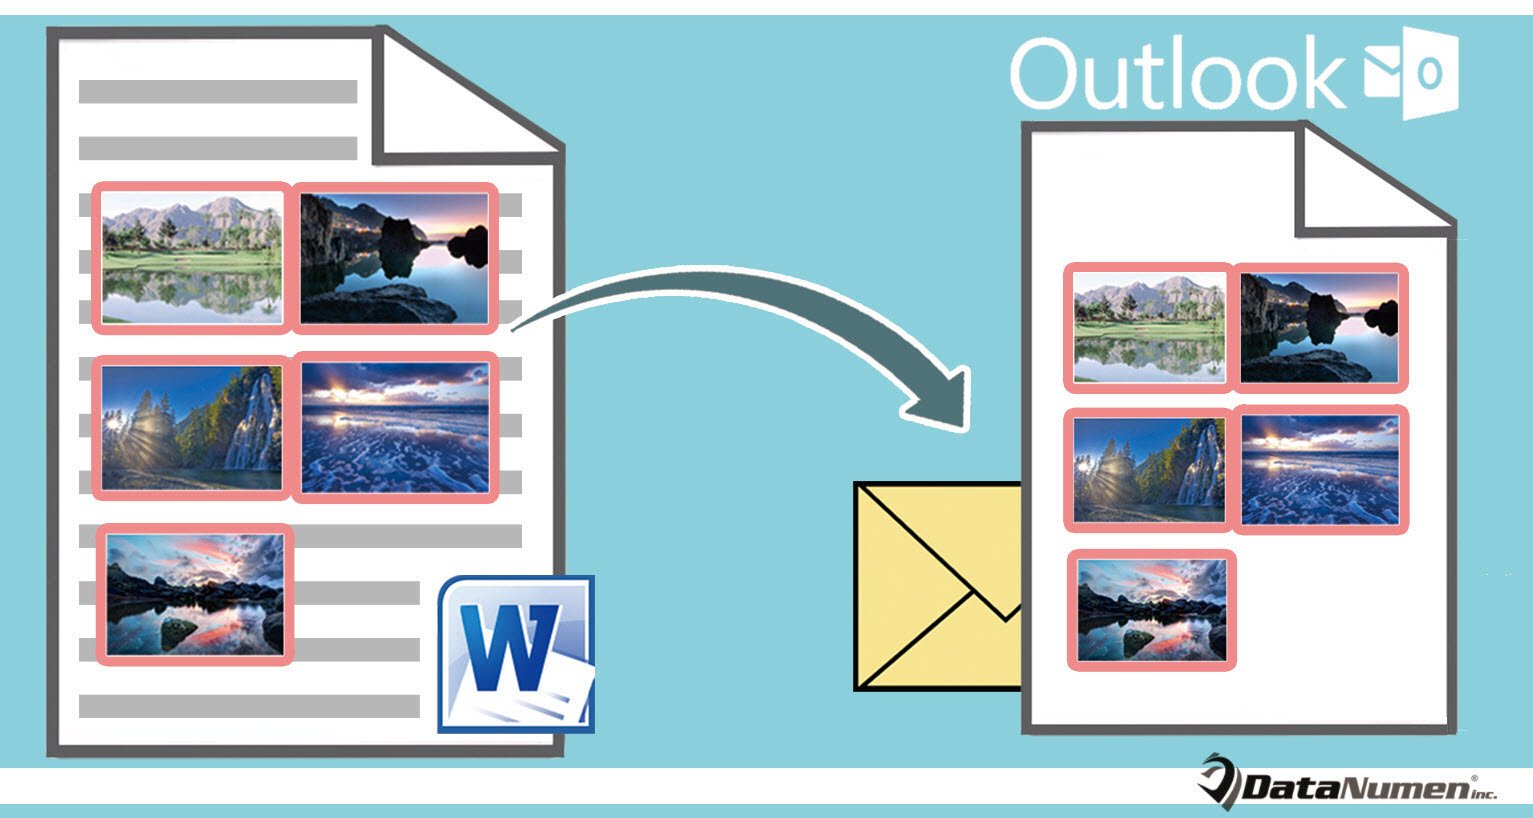 Copy All Images from a Word Document to an Outlook Email